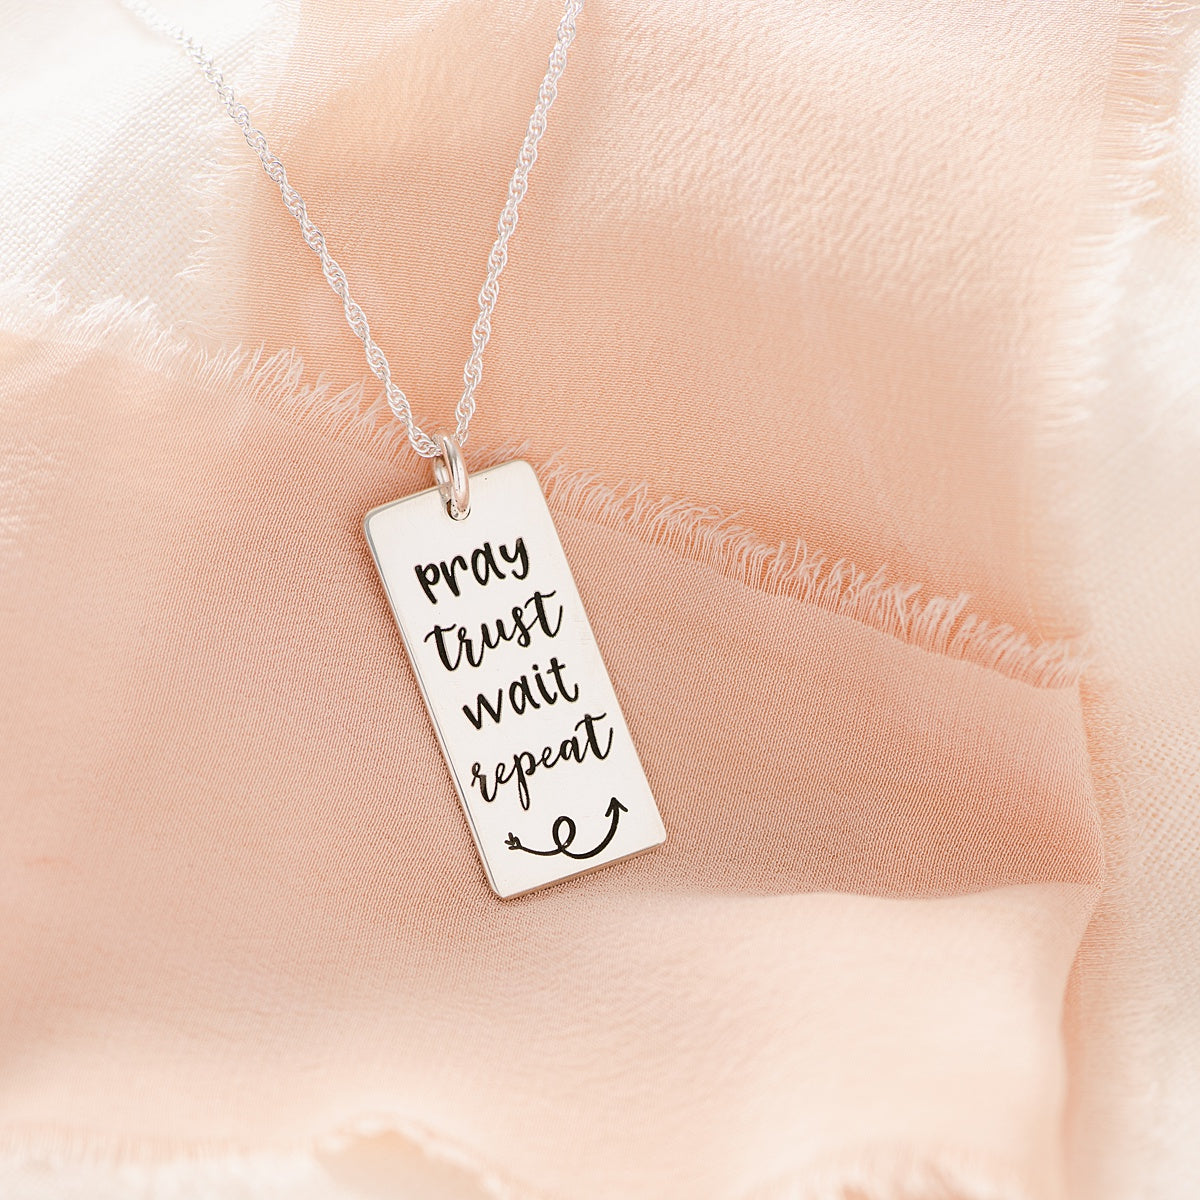 Sterling Silver Pray Trust Wait Repeat Pendant Necklace